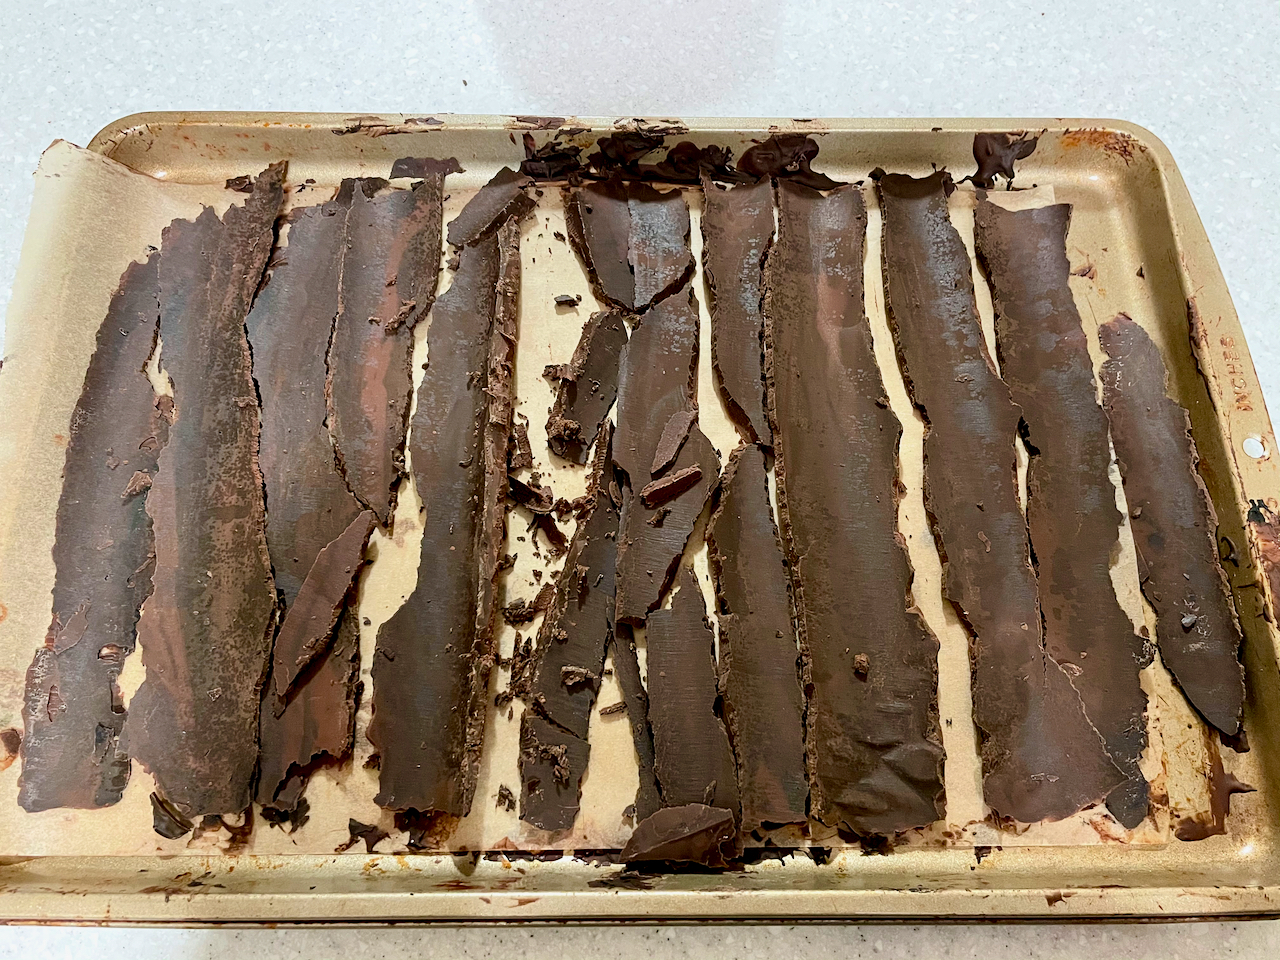 Still smooth chocolate bark shards laying vertically atop a parchment lined baking sheet.